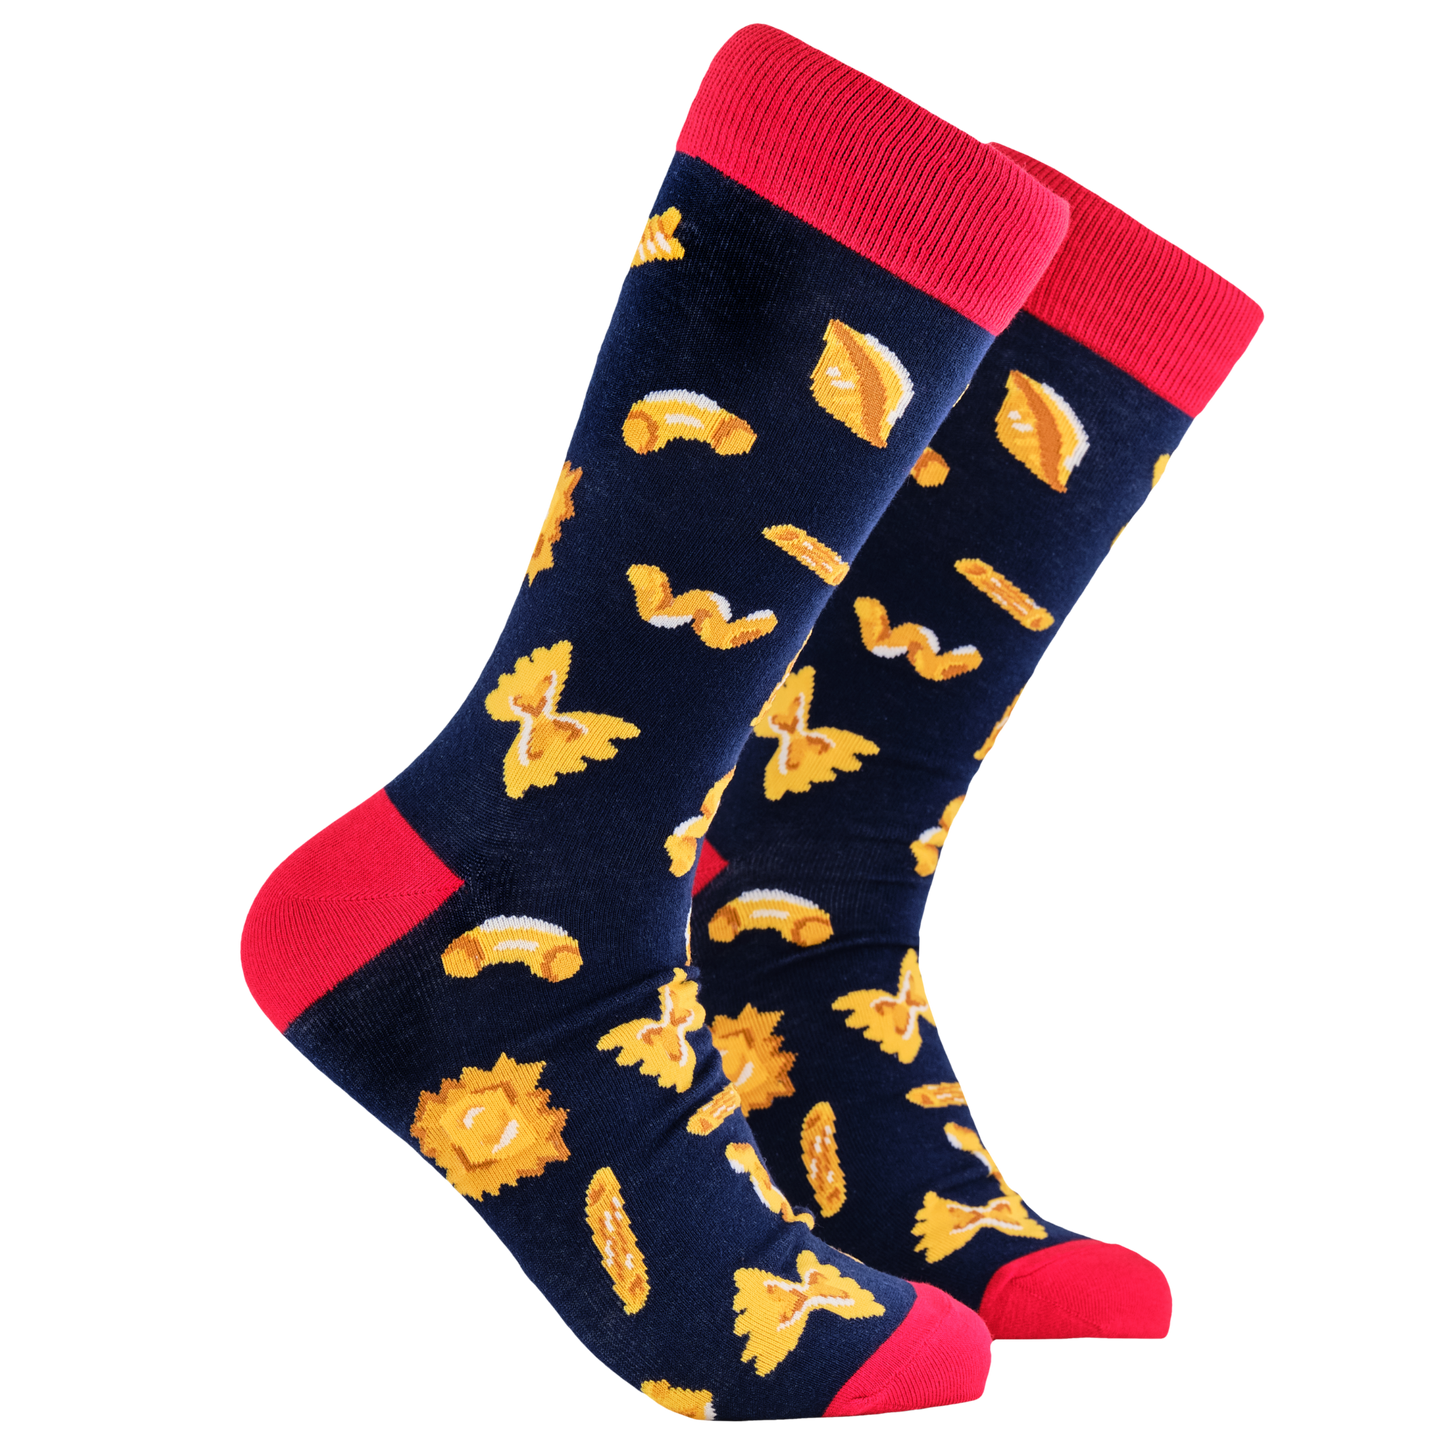 Pasta Lover Socks. A pair of socks depicting different pasta shapes. Dark blue legs, red cuff, heel and toe.